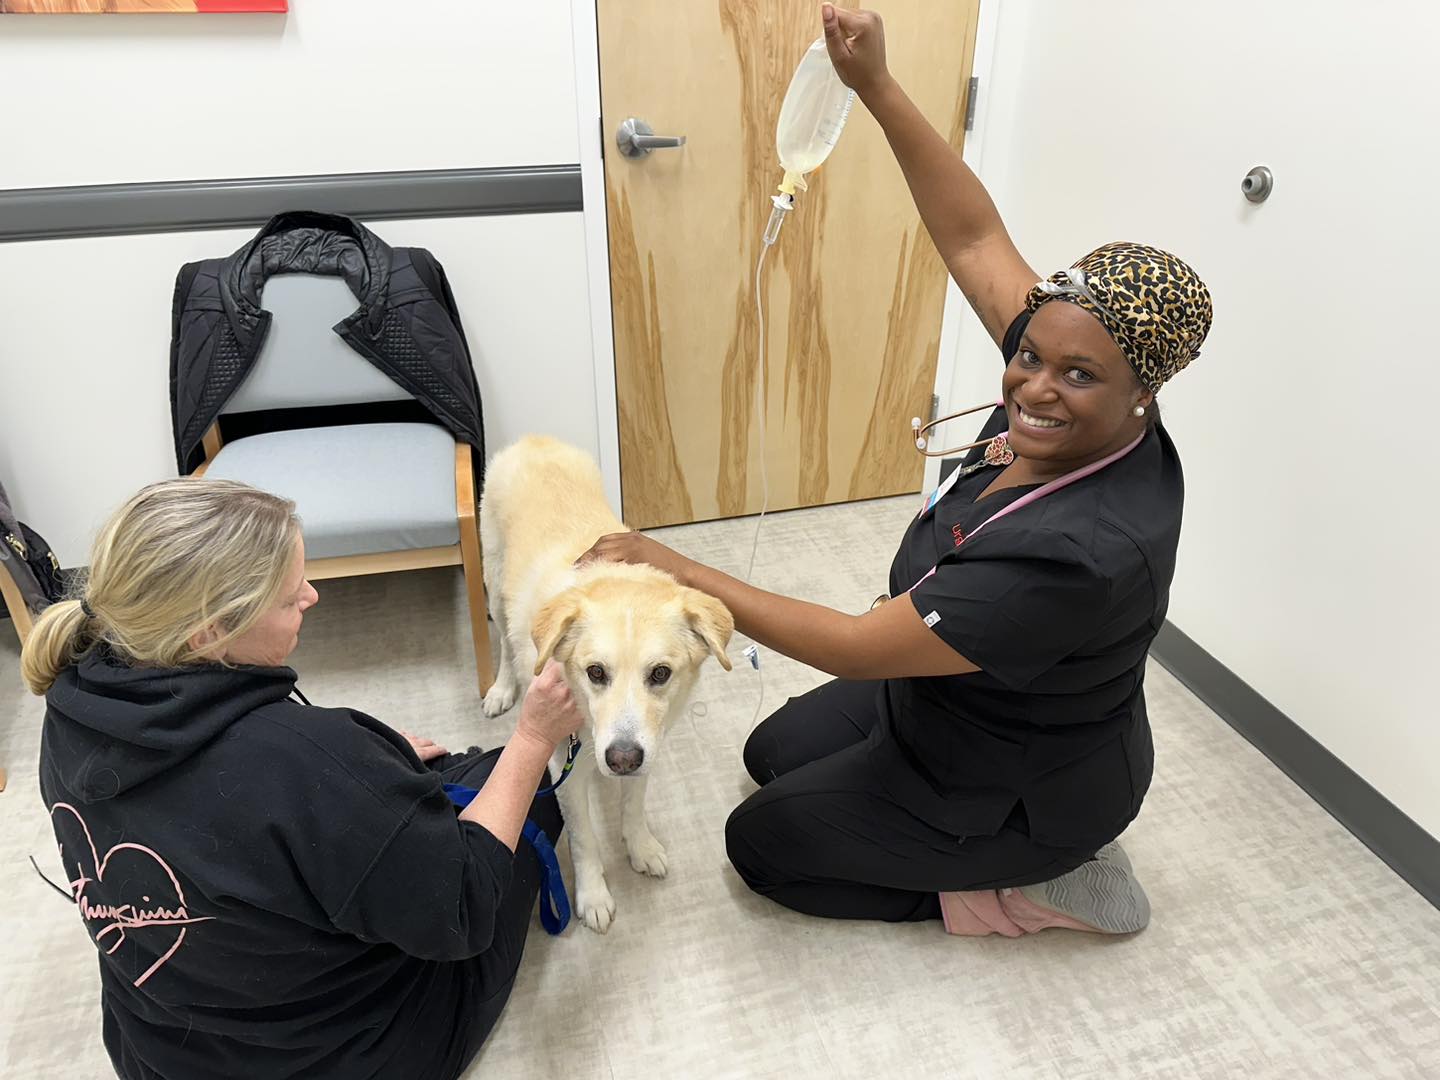 Featured image for post: UrgentVet Now Offering Urgent Pet Care at Clinic